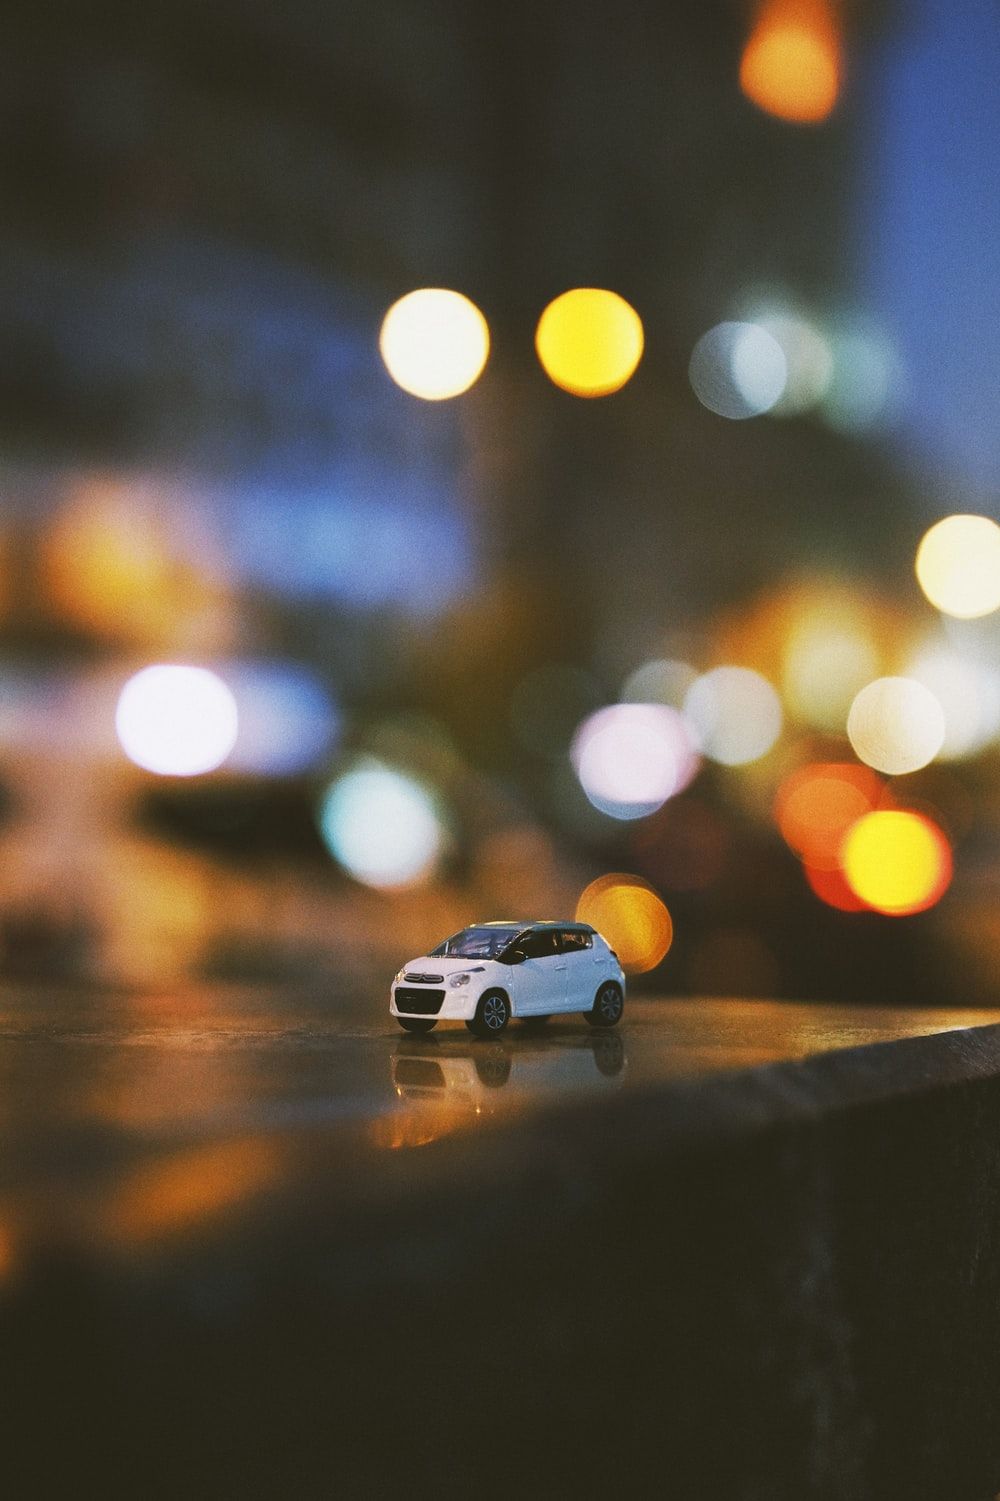 Toy Car Picture. Download Free Image